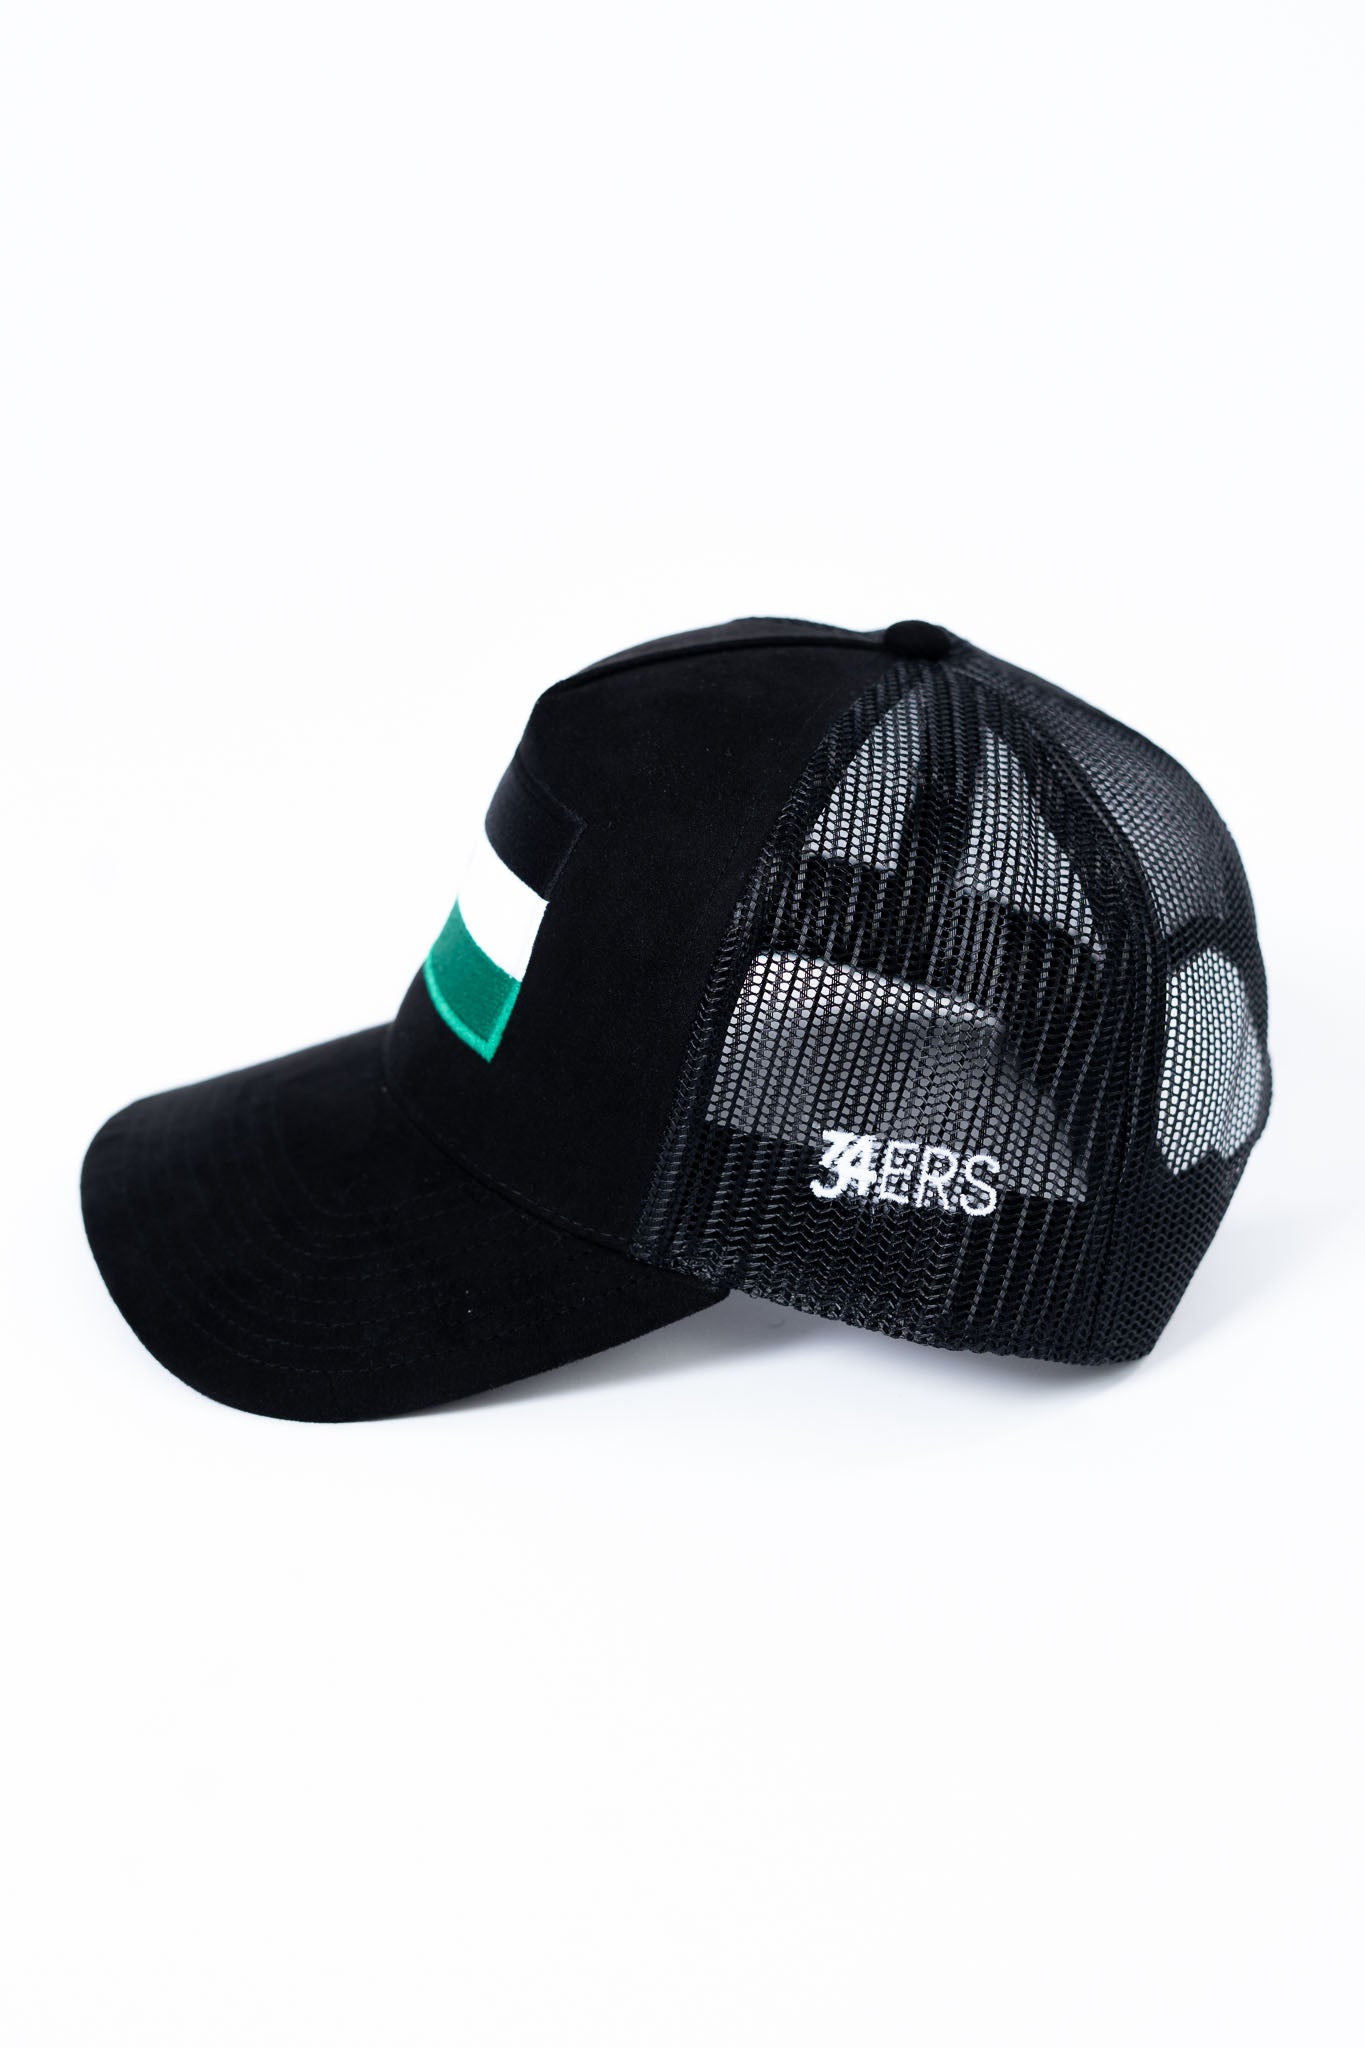 We Stand with Palestine - Black Suede/Mesh Caps